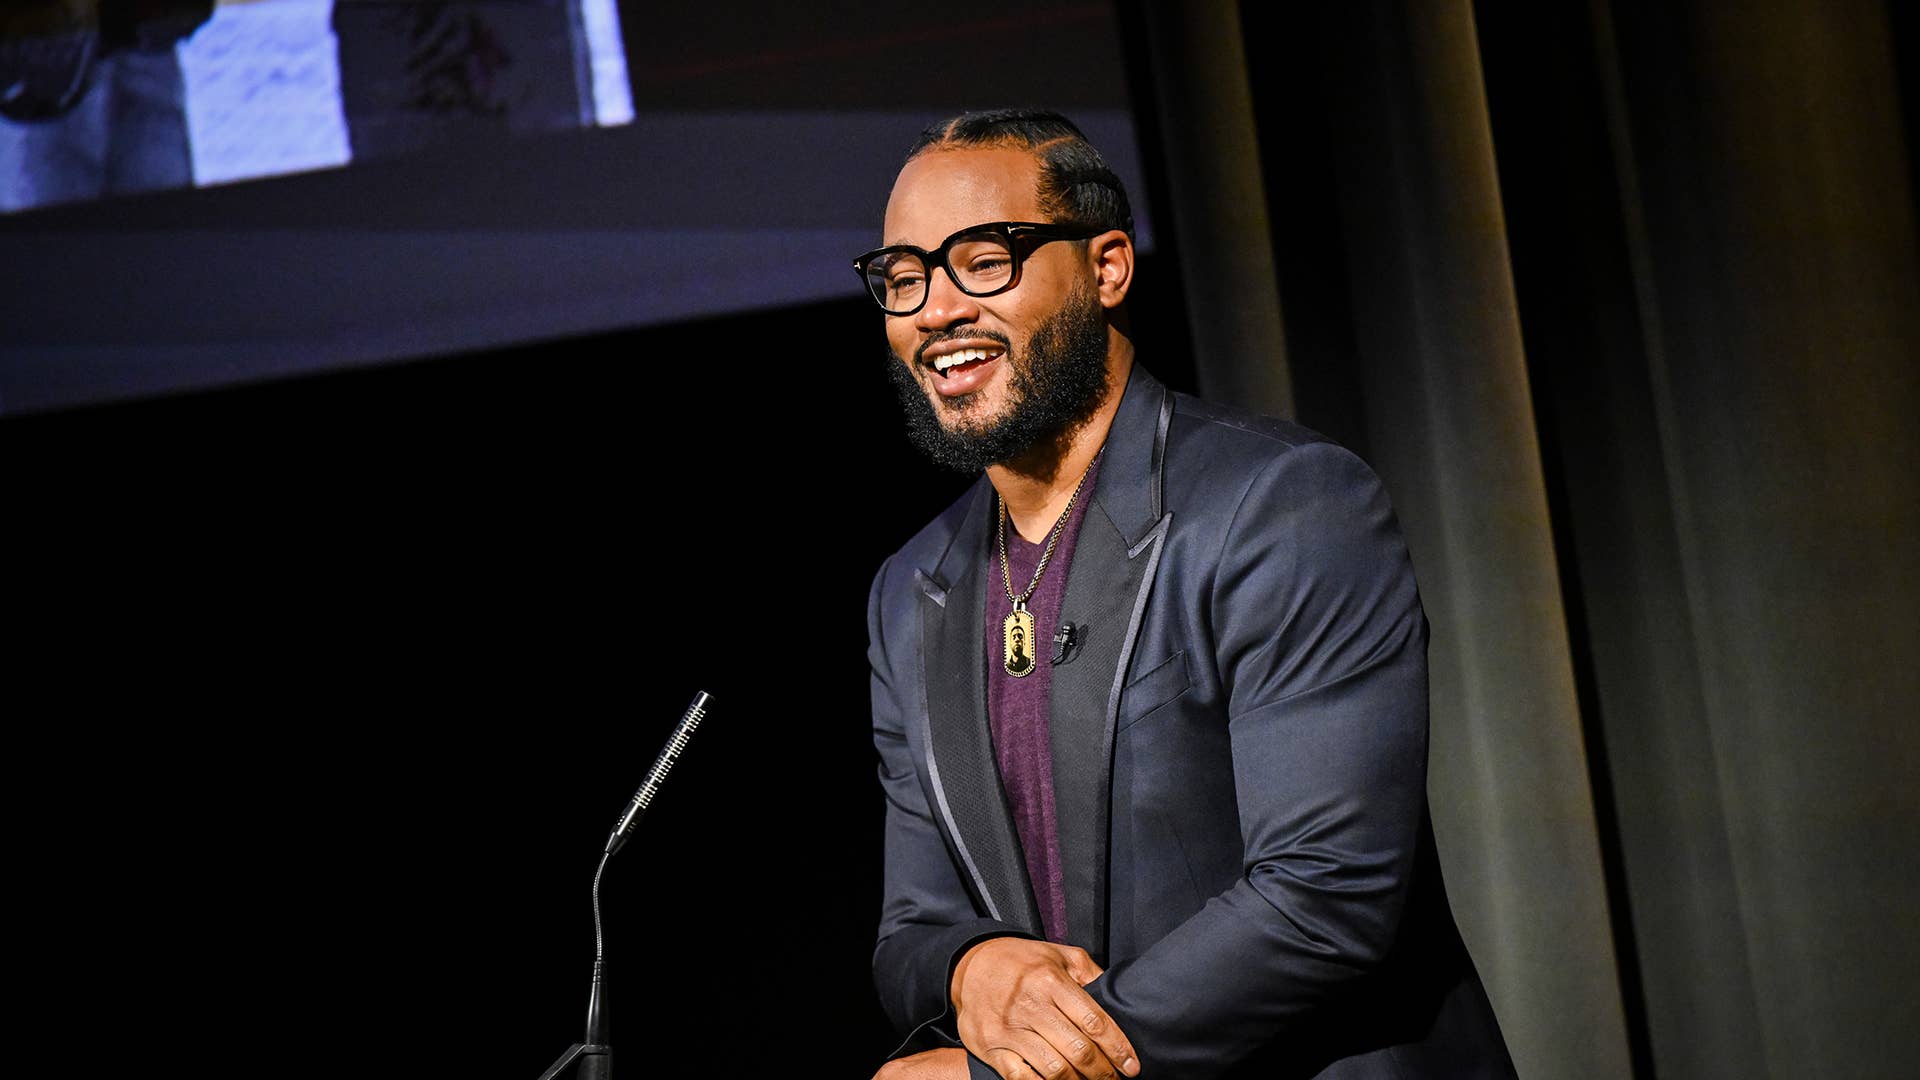 Ryan Coogler speaks during the annual BAFTA David Lean Lecture at BAFTA’s 195 Piccadilly headquarters